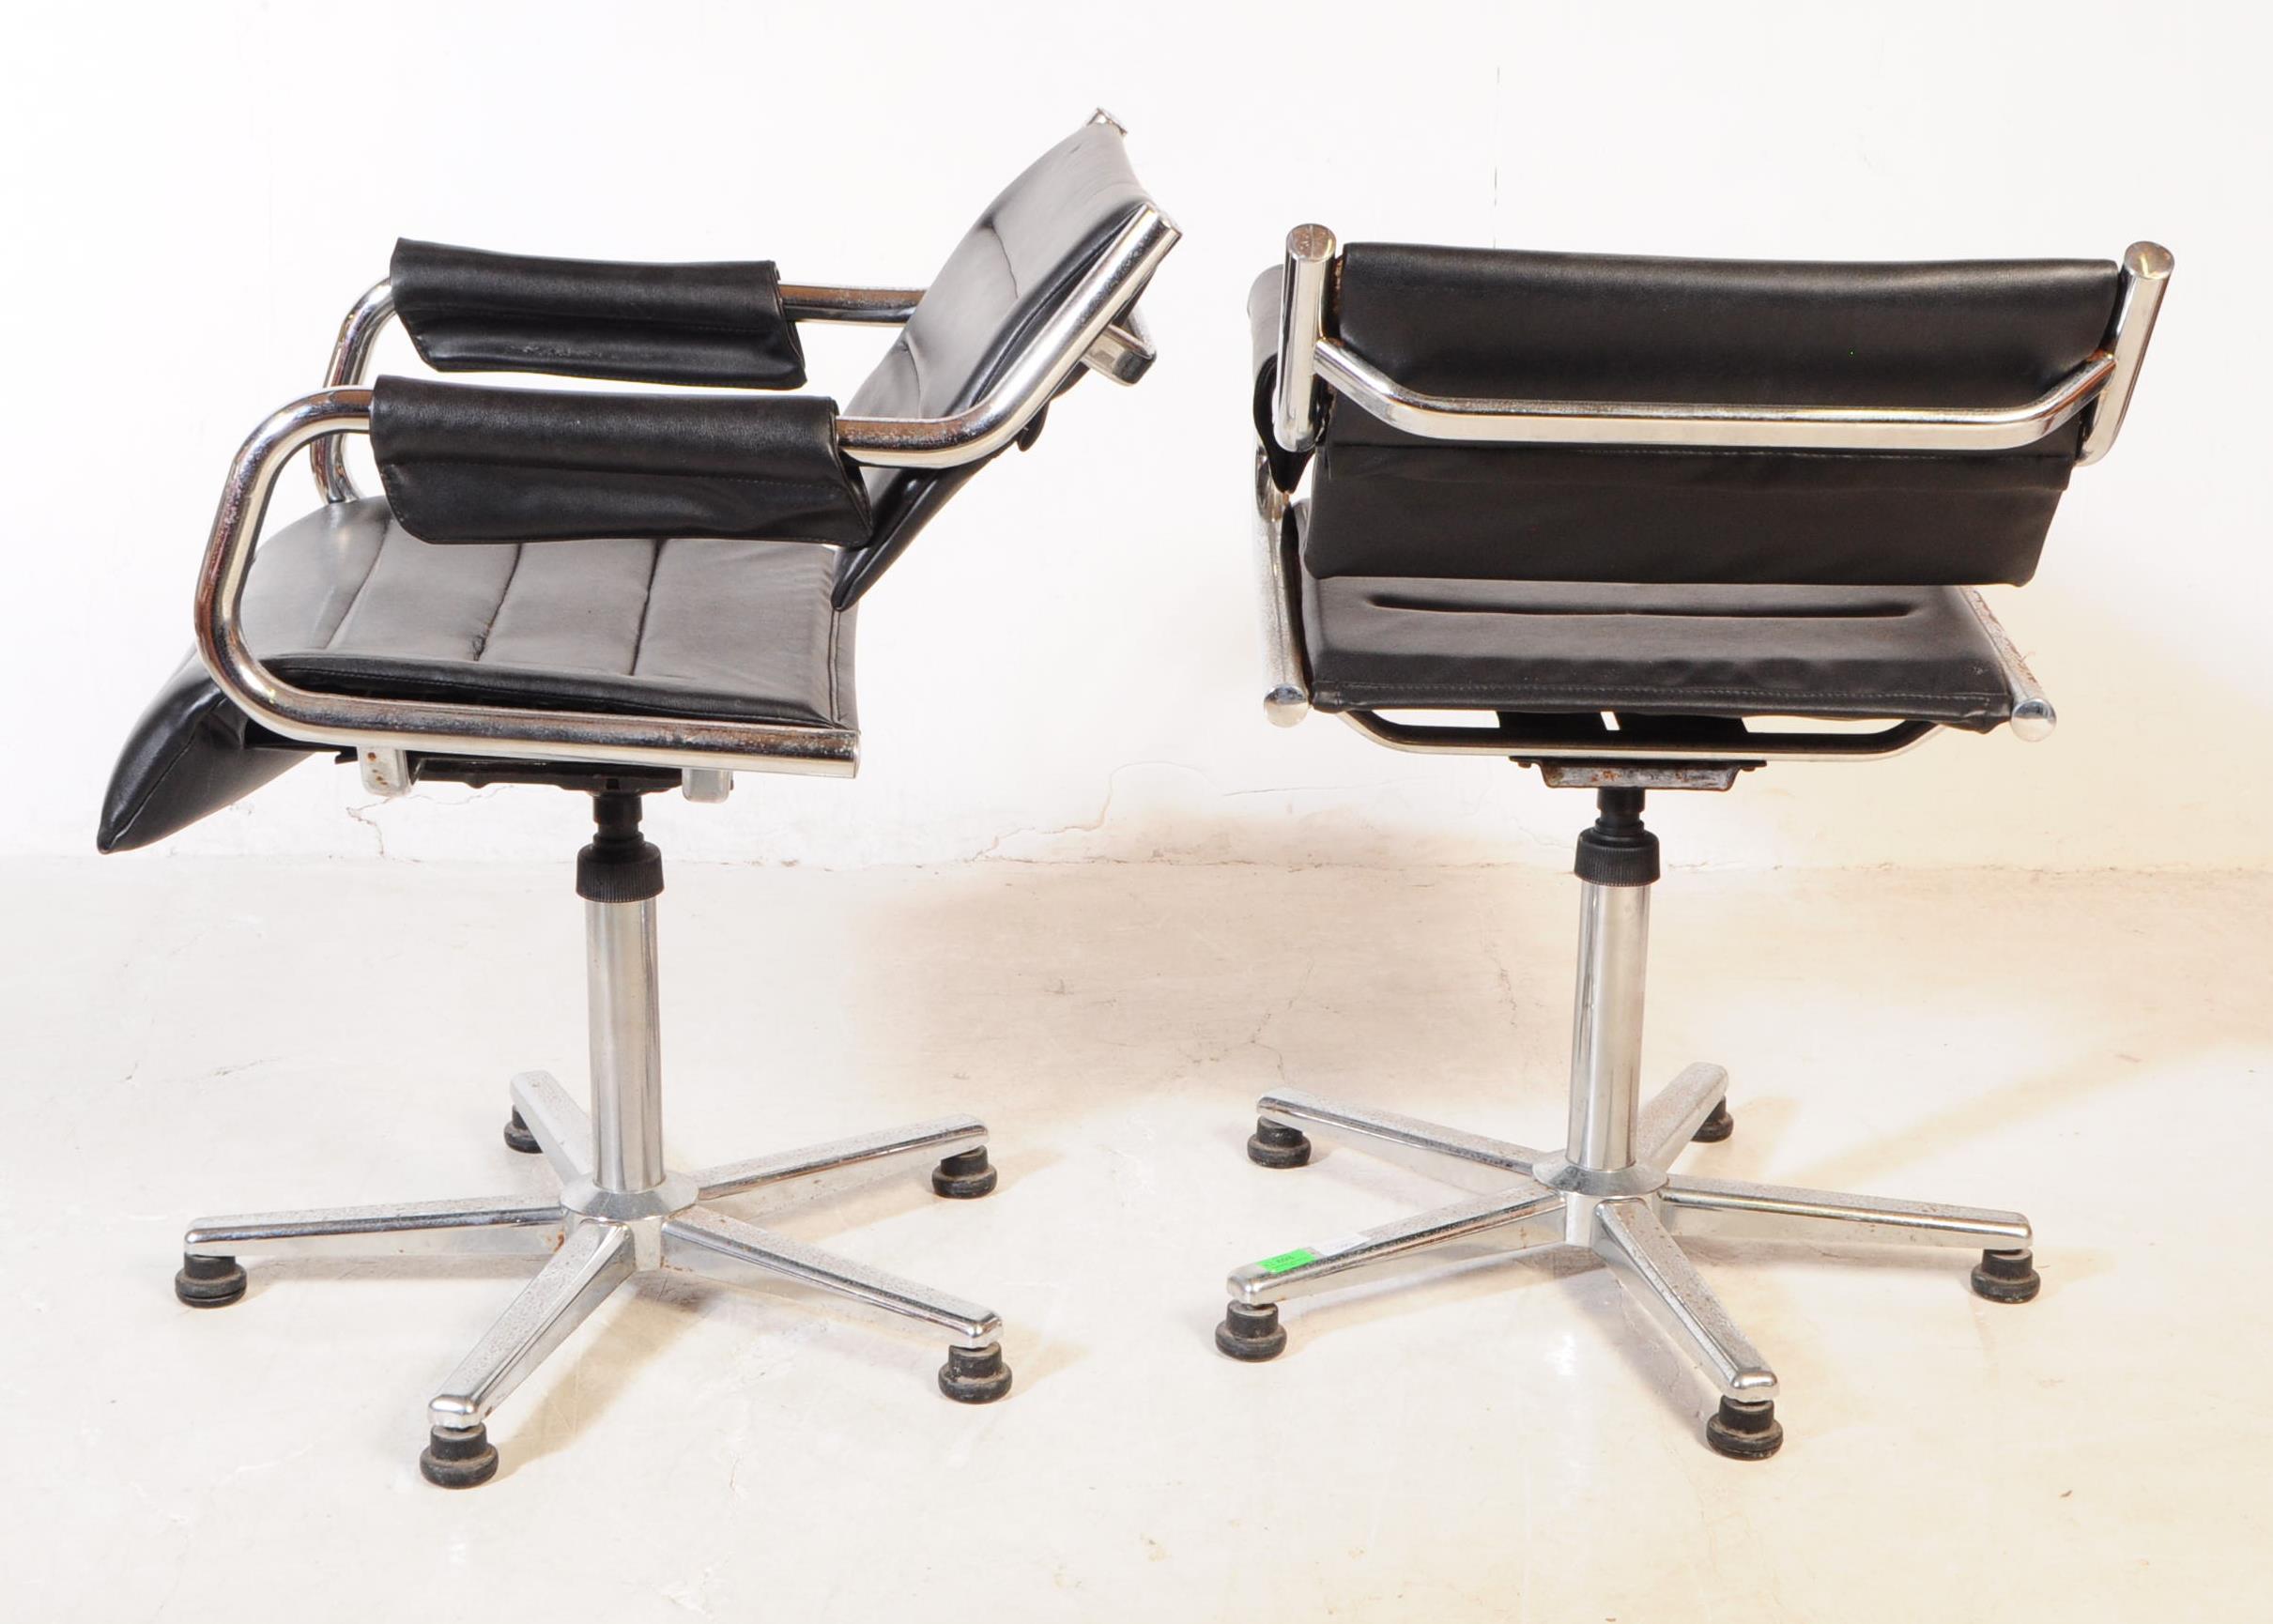 PAIR OF VINTAGE 20TH CENTURY CHROME OFFICE DESK CHAIRS - Image 3 of 5